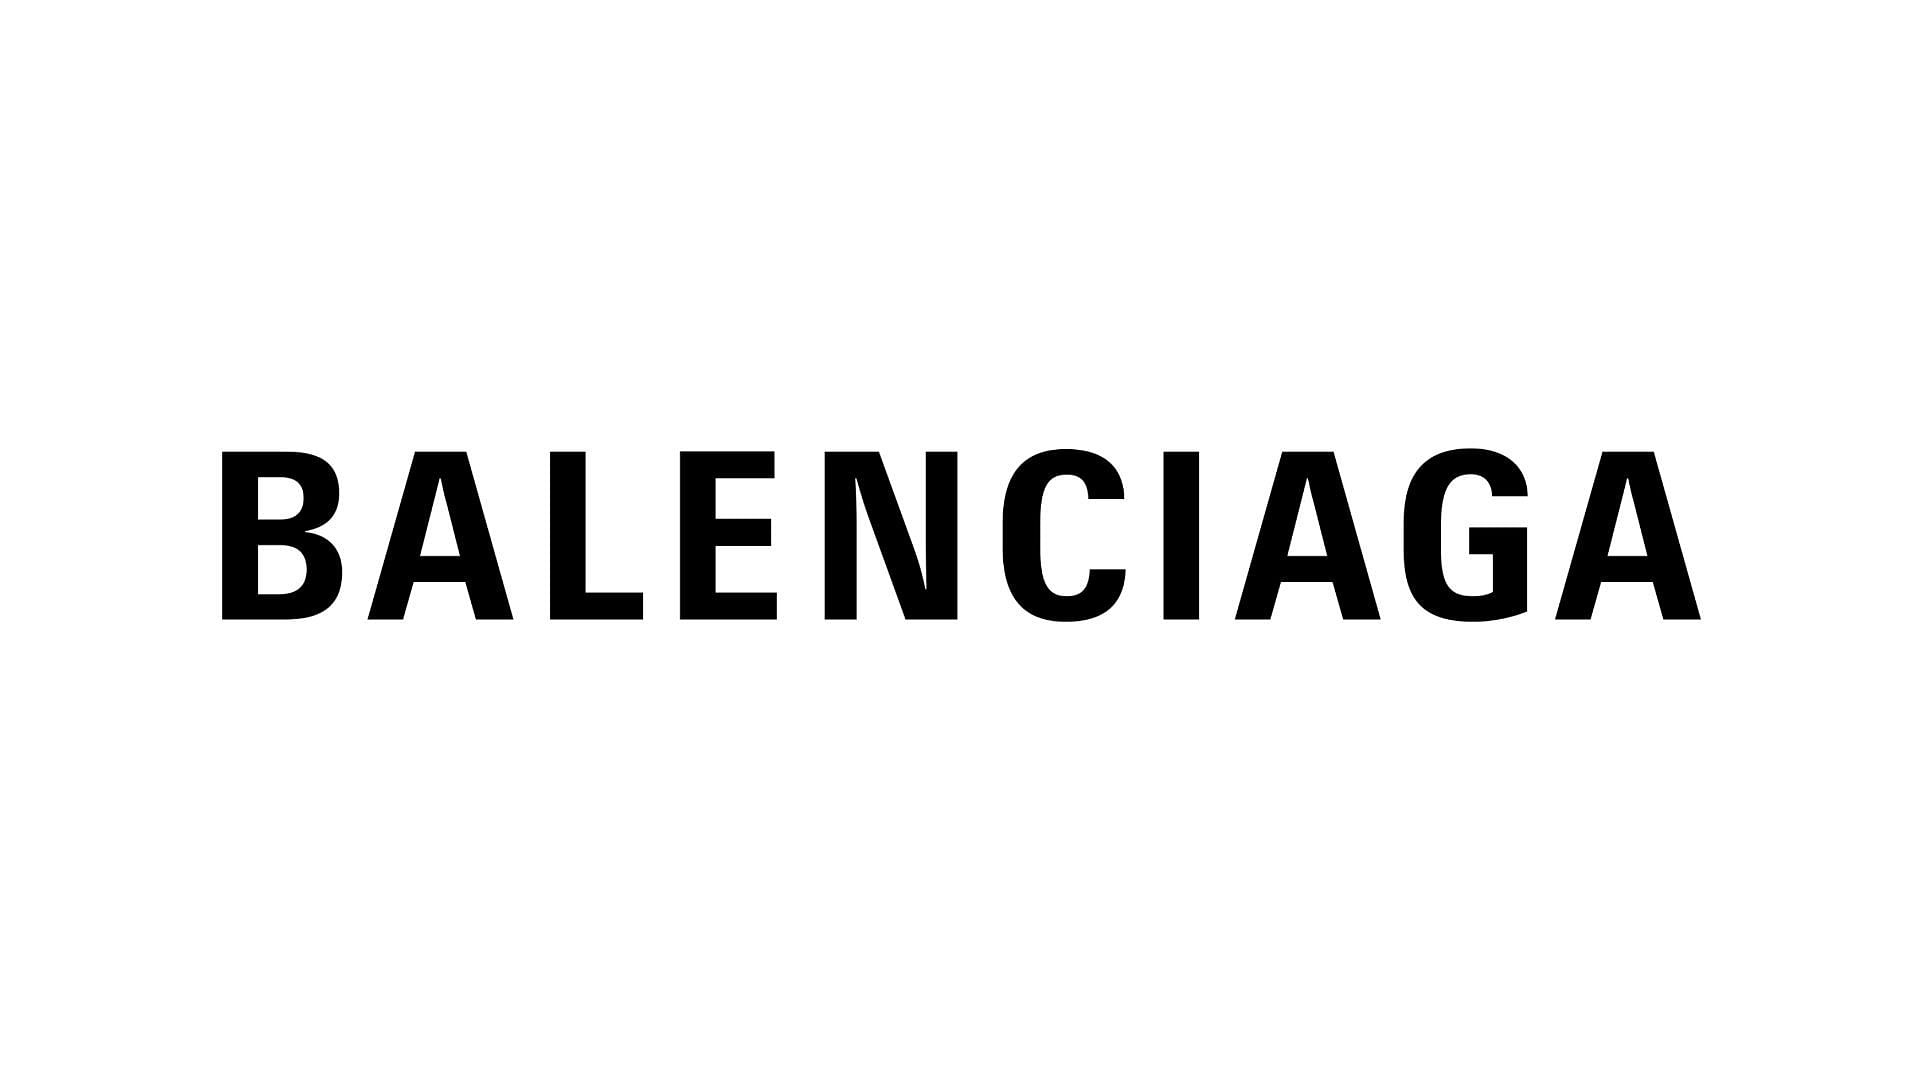 Balenciaga is a popular fashion house which was founded in 1919 (Image via 1000 Logos)